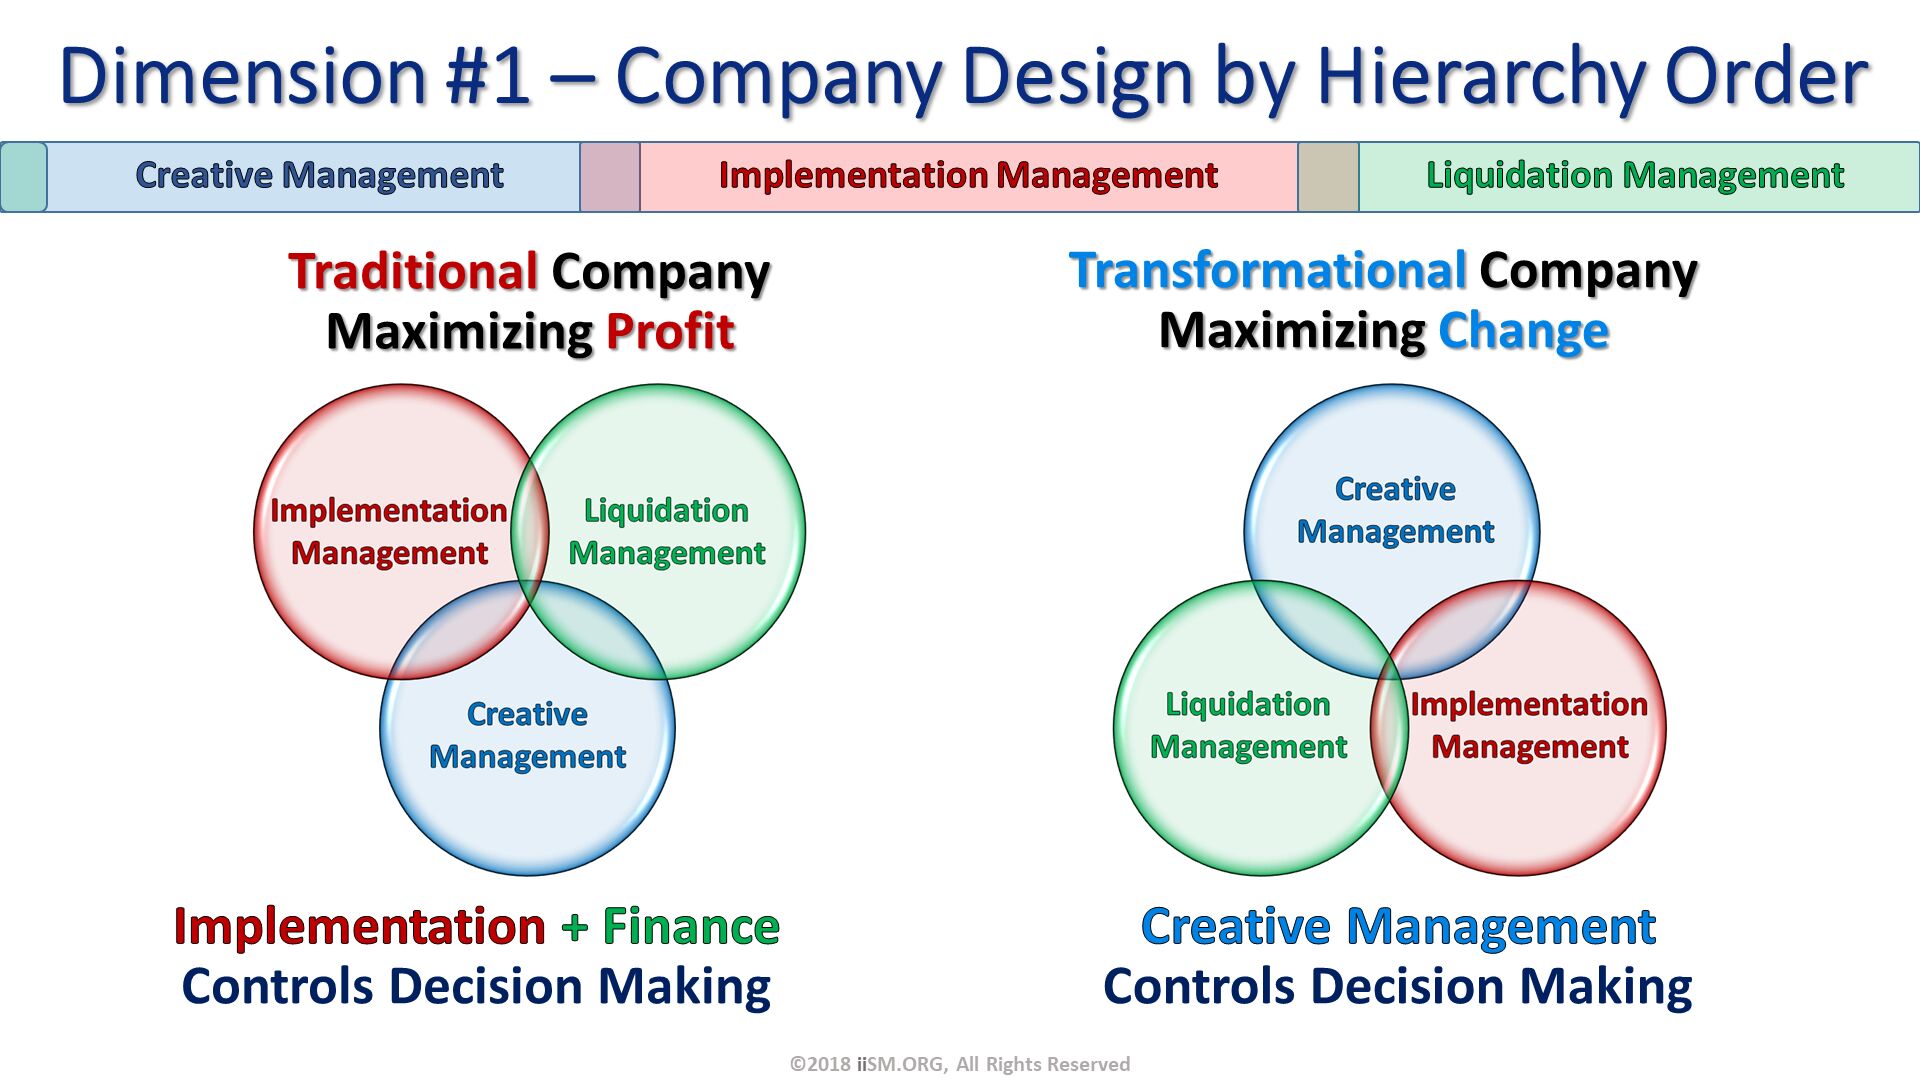 Dimension #1 – Company Design by Hierarchy Order. Traditional CompanyMaximizing Profit. Transformational CompanyMaximizing Change. ©2018 iiSM.ORG, All Rights Reserved. Implementation + Finance Controls Decision Making. Creative Management 
Controls Decision Making. 